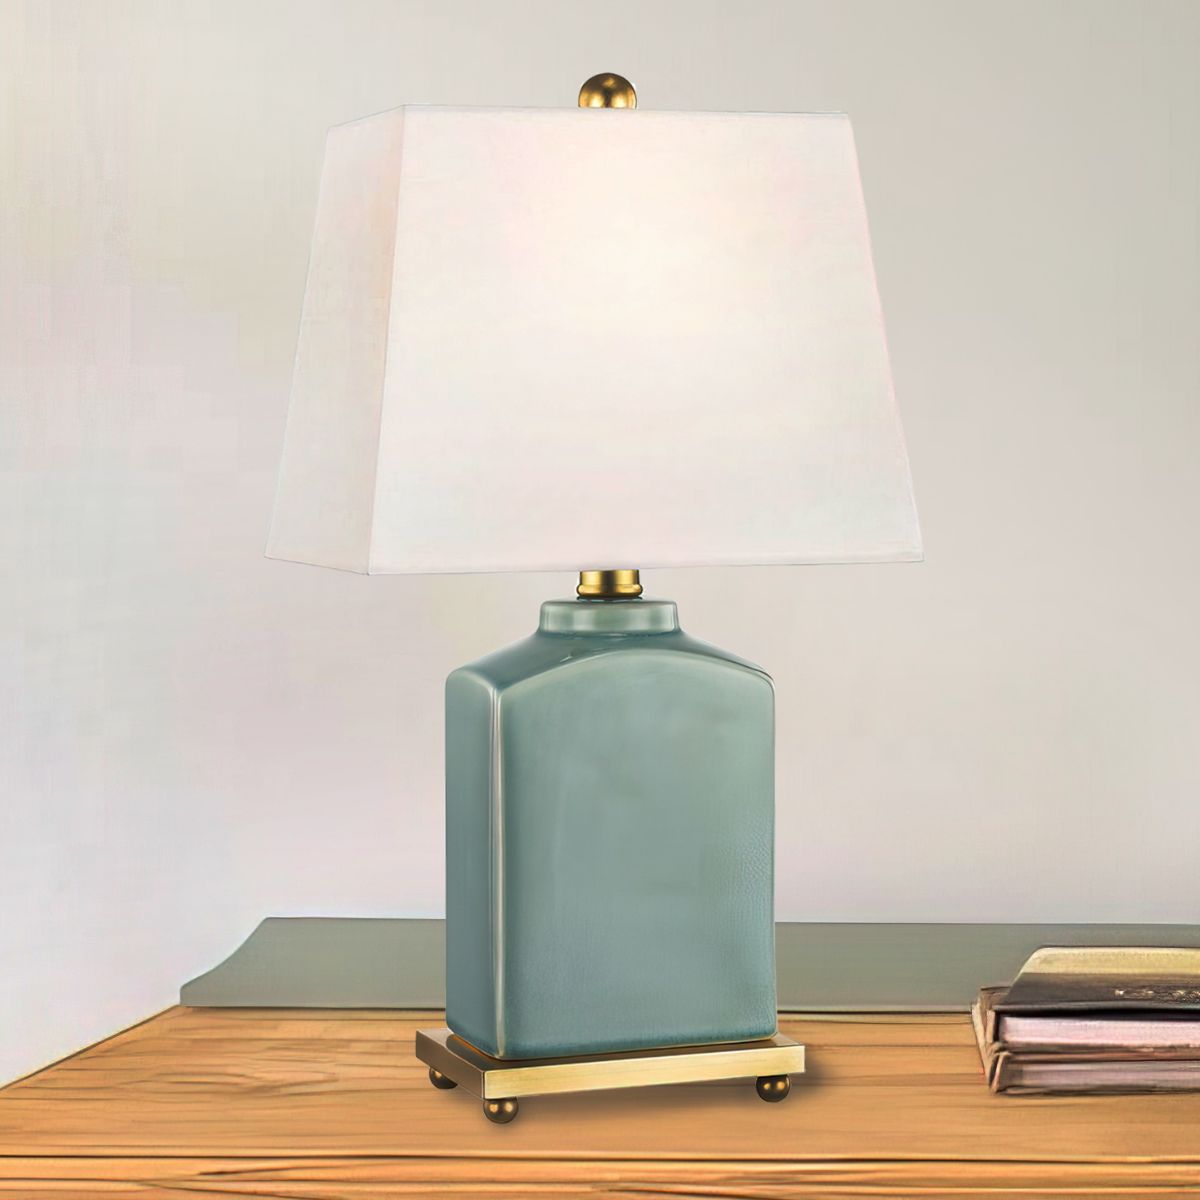 Brynn Table Lamp with Brass Accents - Bees Lighting